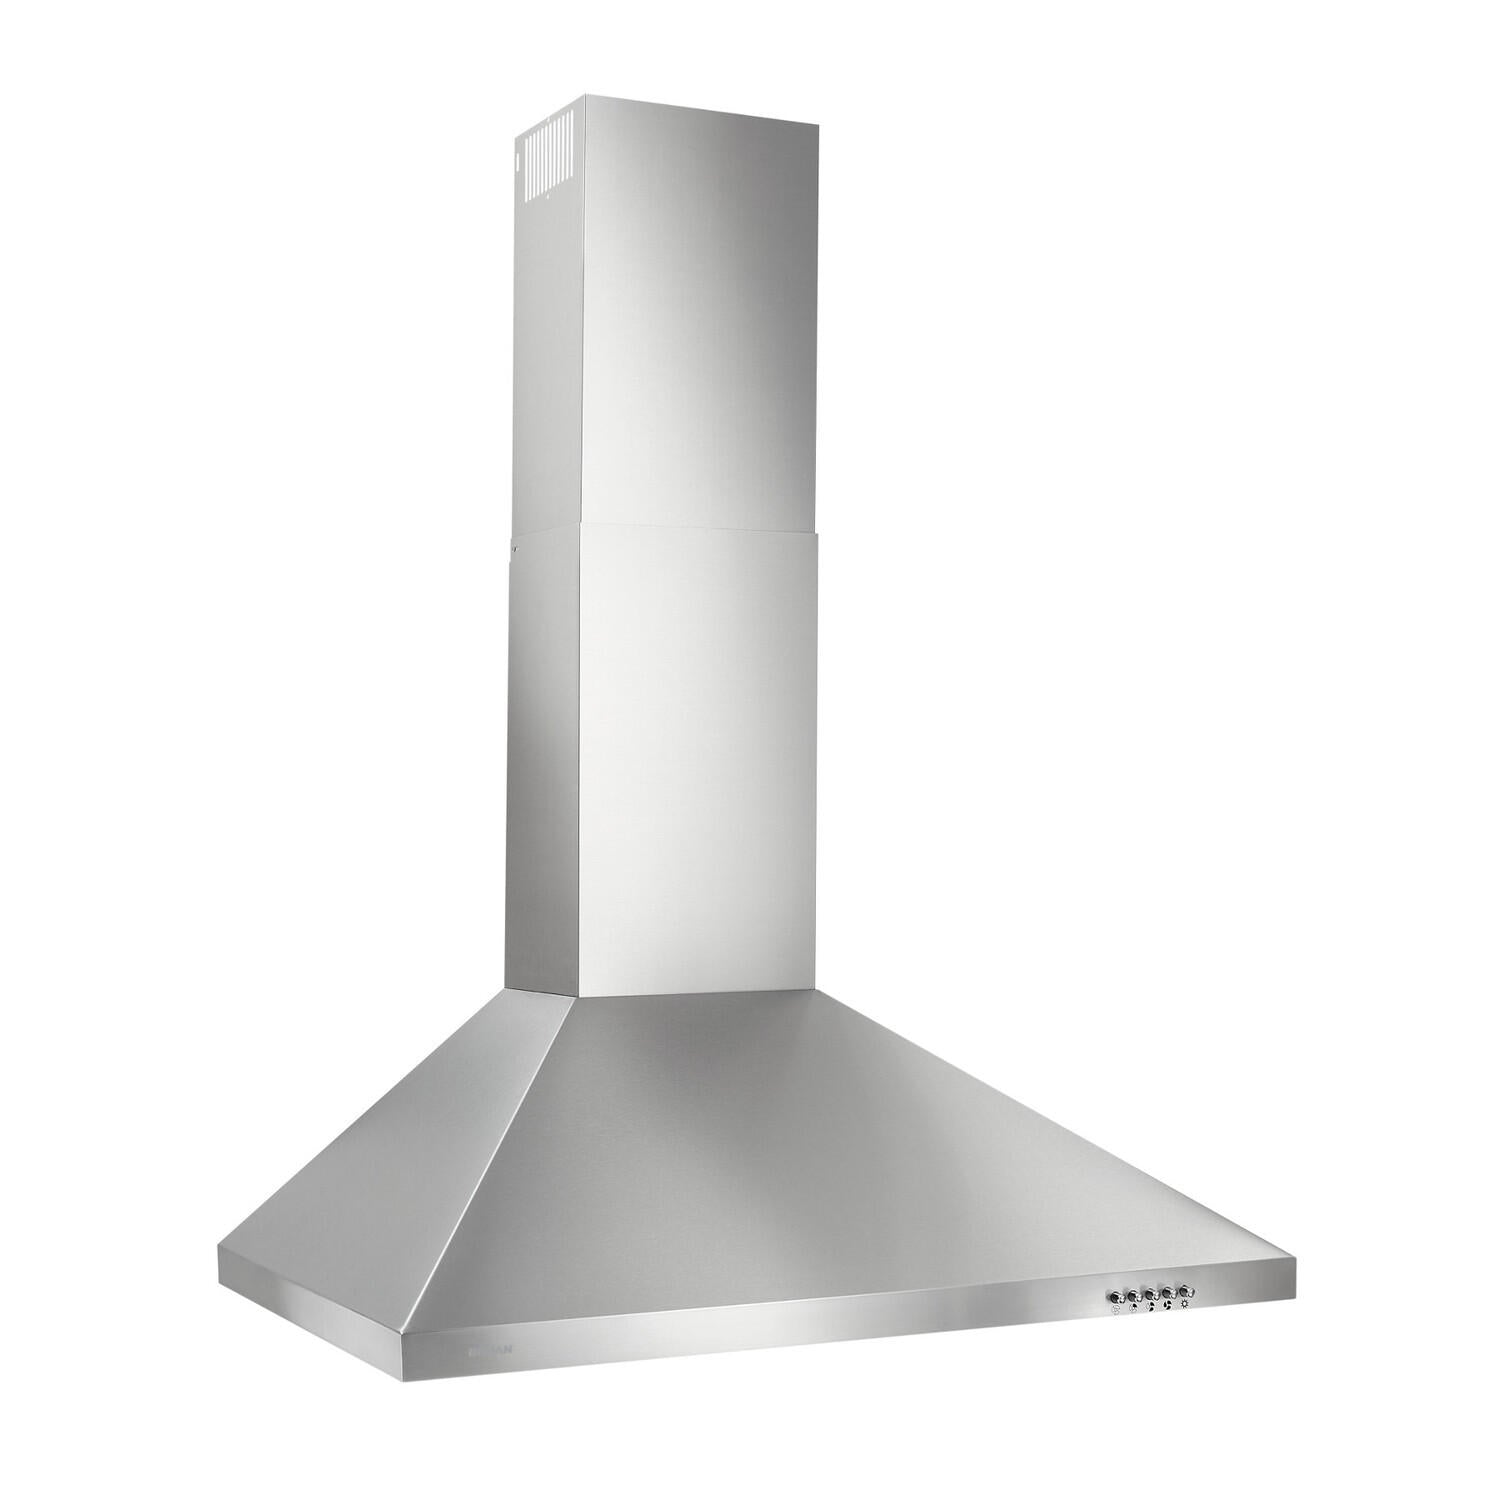 Broan BW5036SSL Broan® 36-Inch Convertible European Style Wall-Mounted Chimney Range Hood, 390 Max Blower Cfm, Stainless Steel Led Light